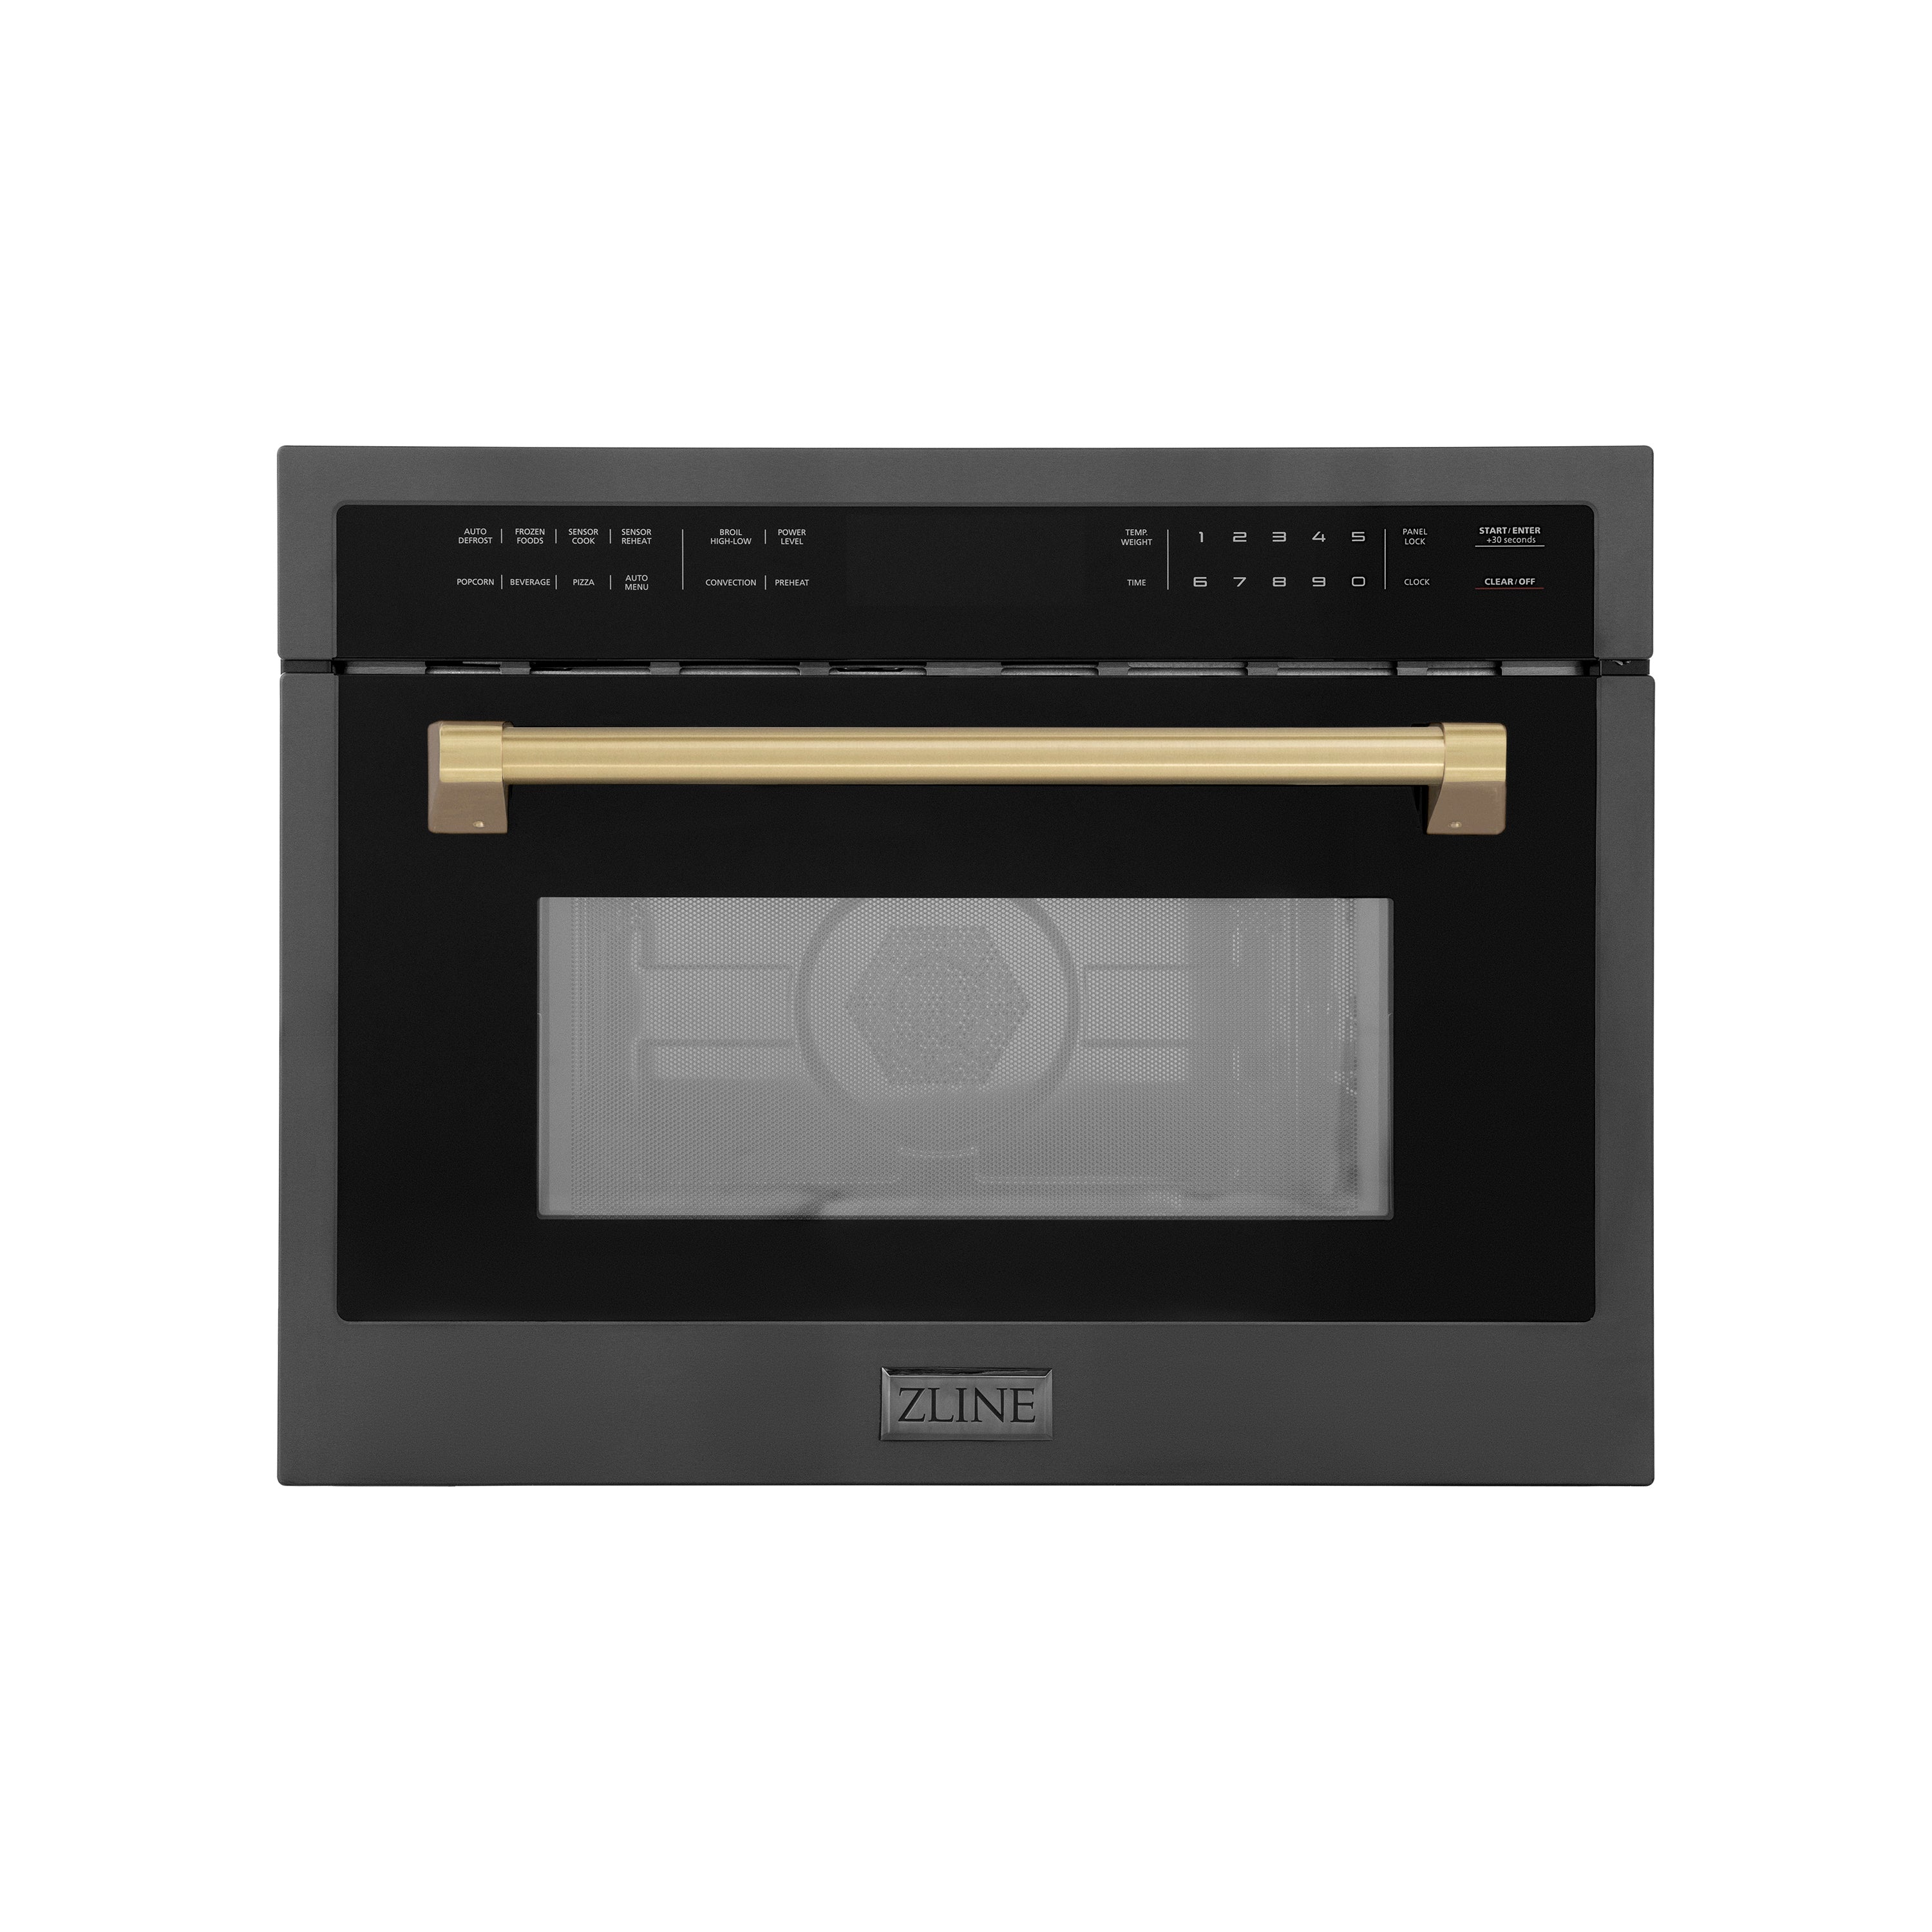 ZLINE Autograph Edition 24 in. 1.6 cu ft. Built-in Convection Microwave Oven in Black Stainless Steel with Champagne Bronze Accents (MWOZ-24-BS-CB) Front View Door Closed